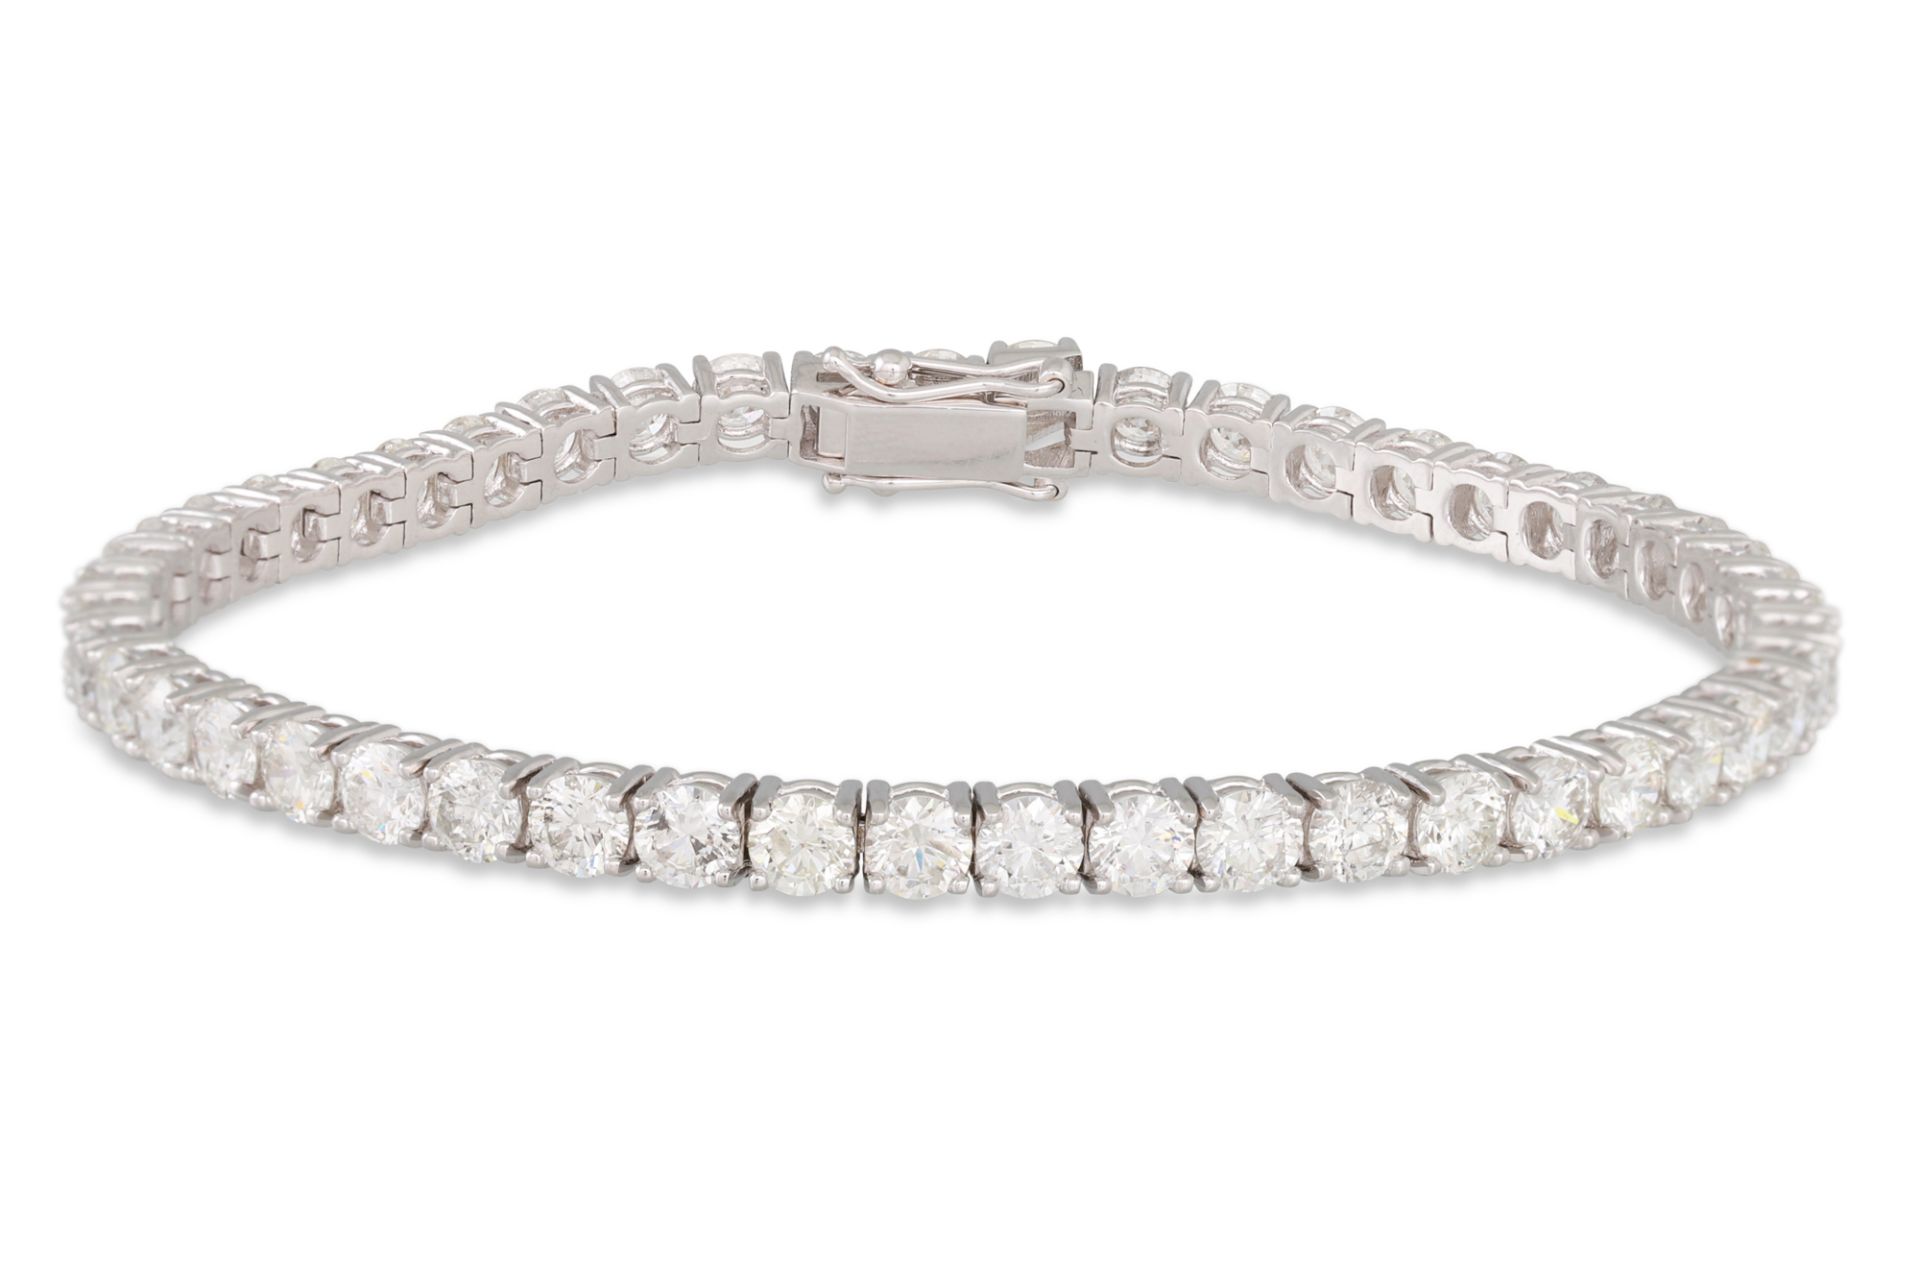 A DIAMOND LINE BRACELET, the brilliant cut diamonds mounted in 18ct white gold. Estimated: weight of